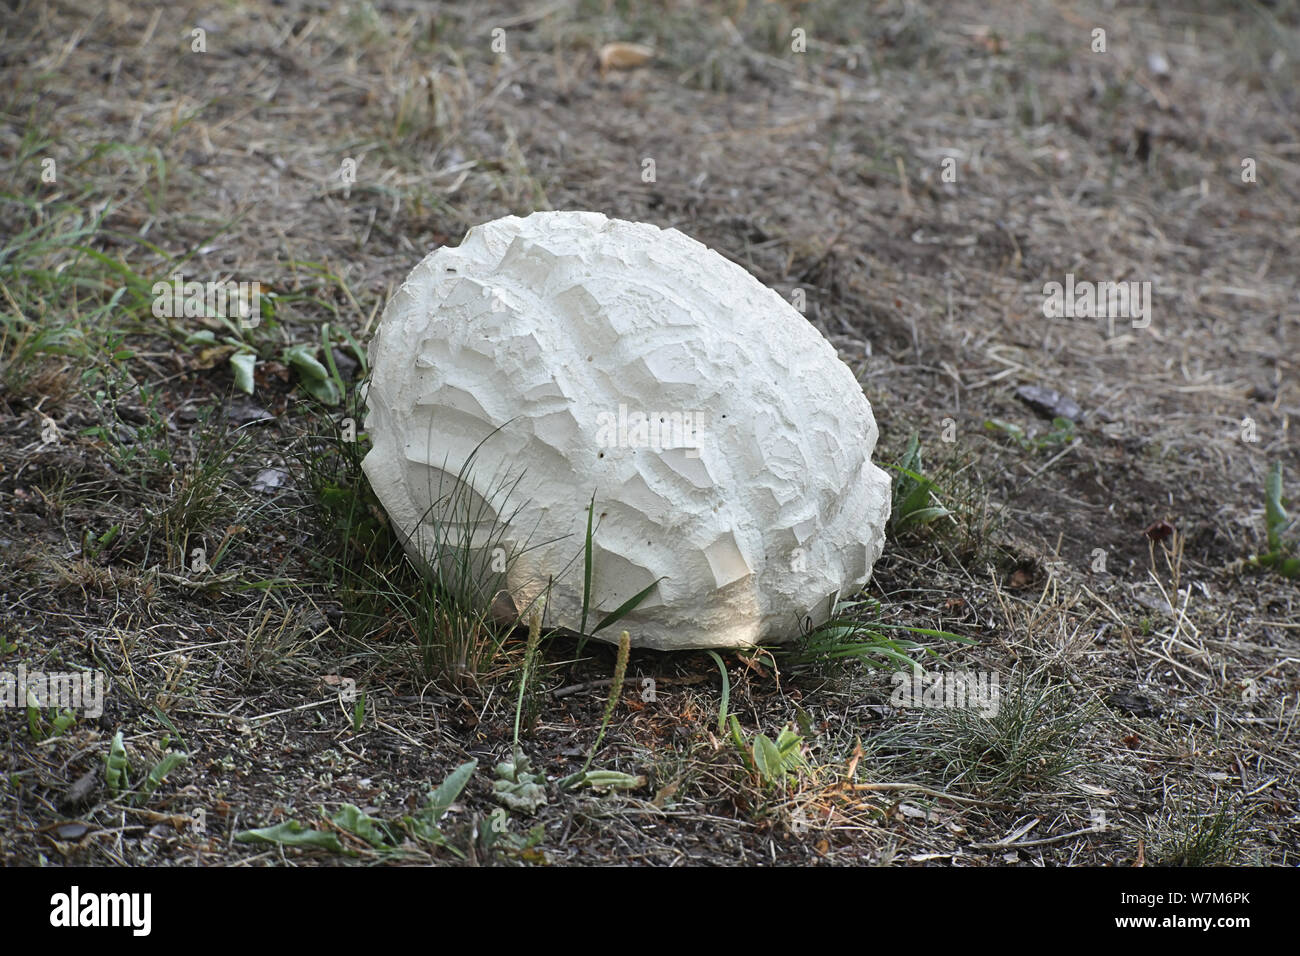 Calvatia gigantea, commonly known as the giant puffball, growing wild in Finland Stock Photo